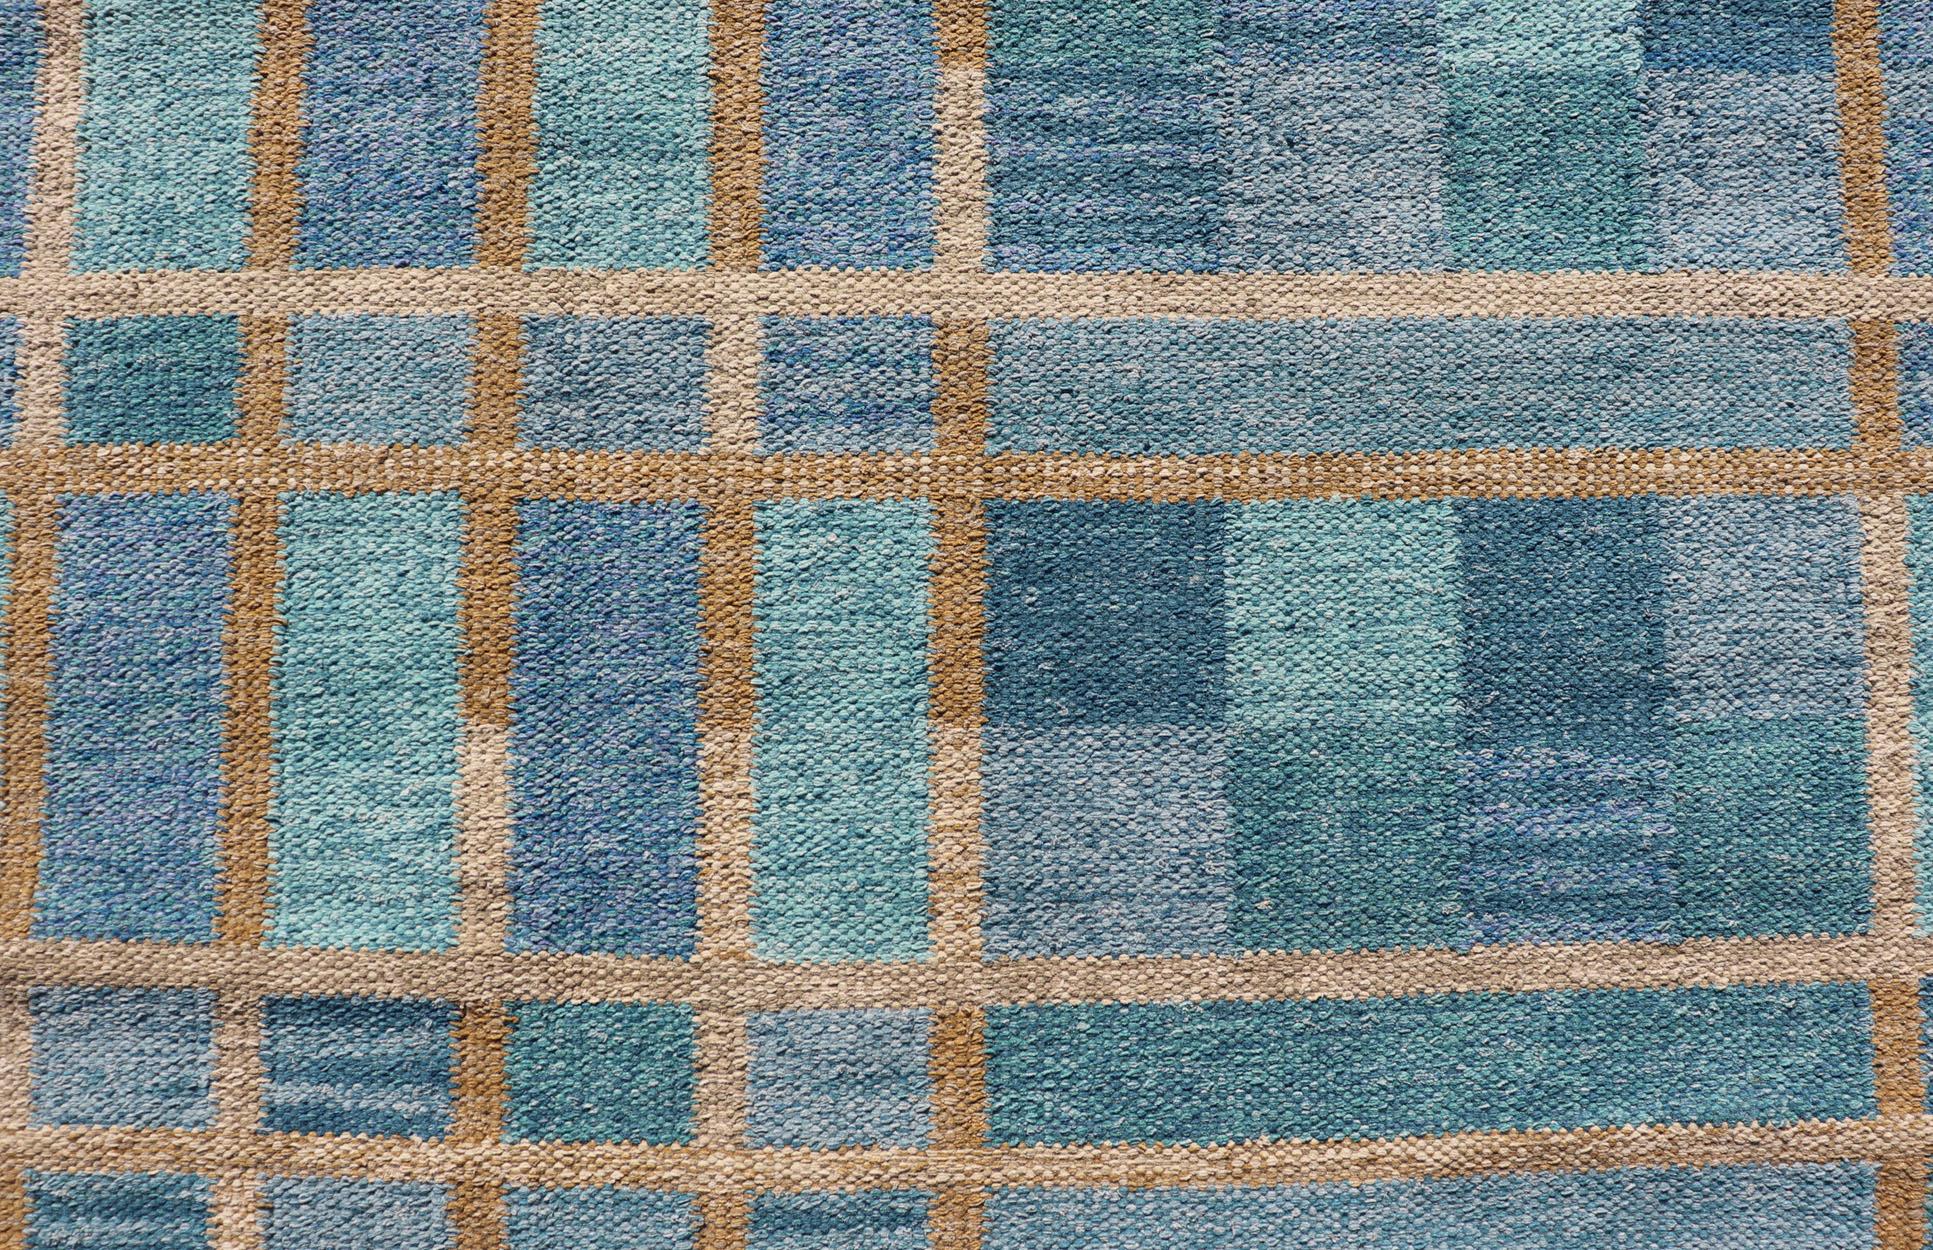 Large Scandinavian Inspired Design Rug in Blue, Teal, Green, and Gold 1